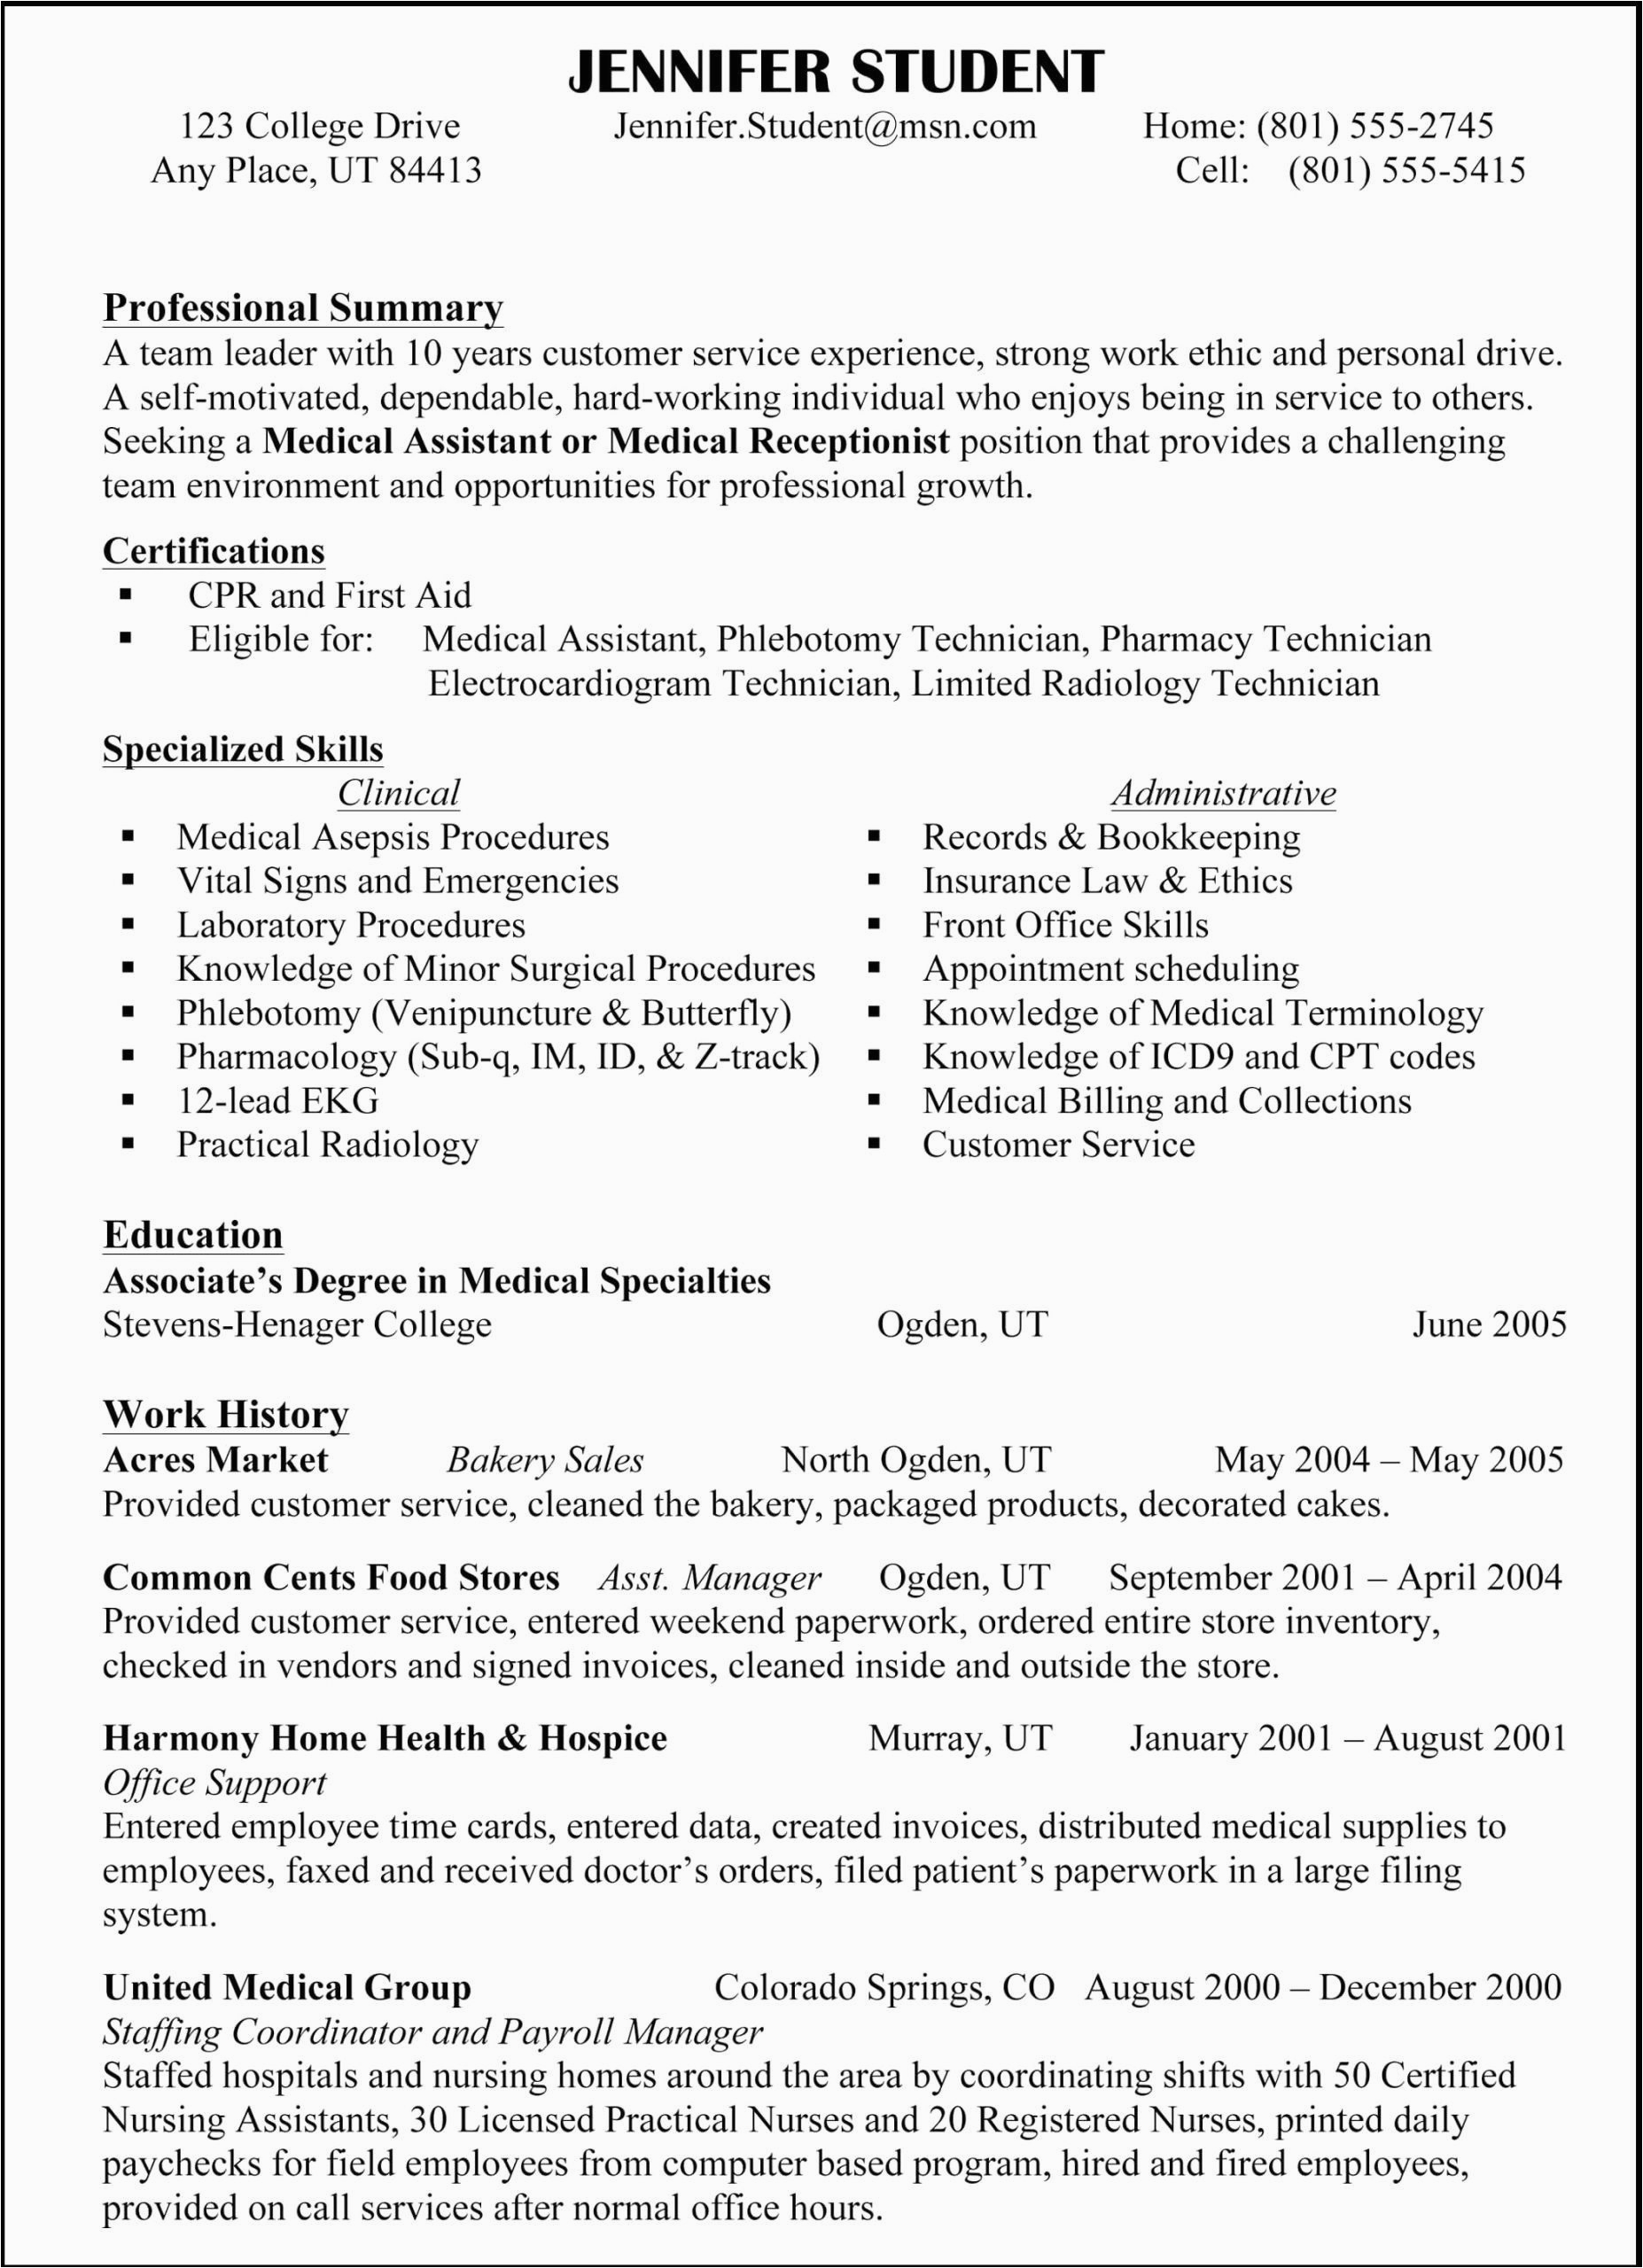 Headline or Summary for Resume Samples Headline for Resume Examples Best Executive Administrative assistant